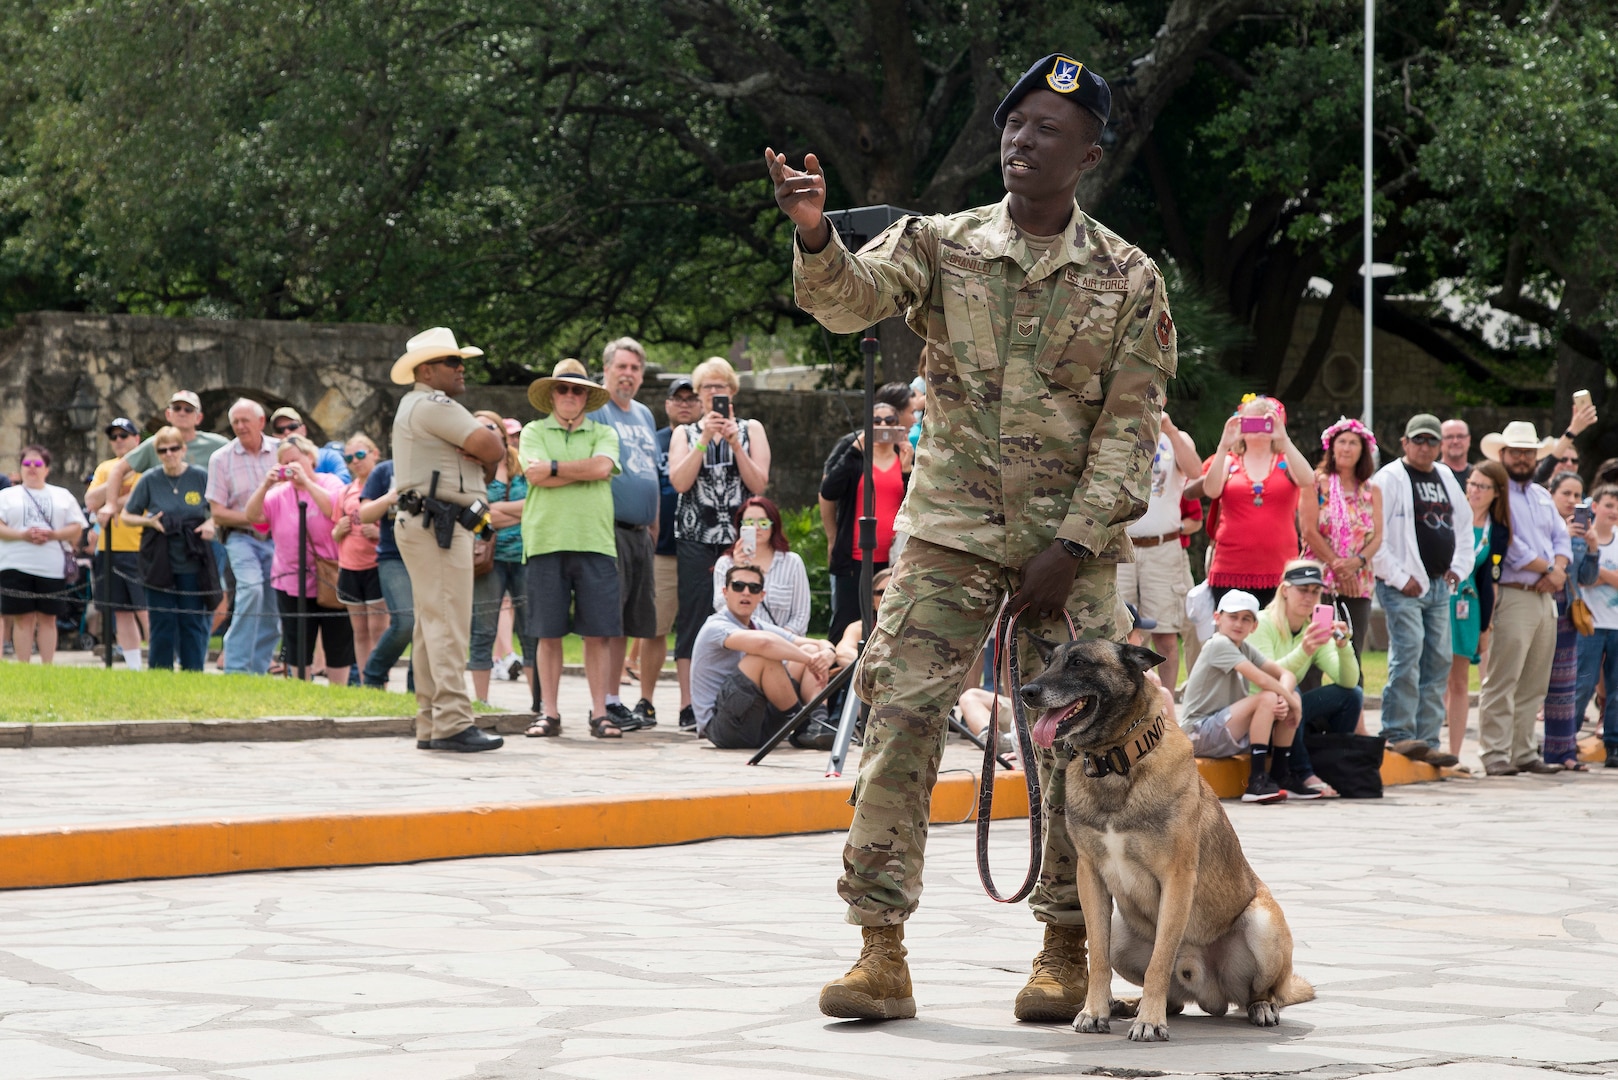 Staff Sgt. Wilson Brantley, 802nd Security Forces Squadron military working dog handler, performs a K-9 demonstration during San Antonio’s Fiesta Air Force Day at the Alamo, April 22, 2019. From its beginning in 1891, Fiesta has grown into an annual celebration that includes civic and military observances, street and river parades, exhibits, pilgrimages and memorials.